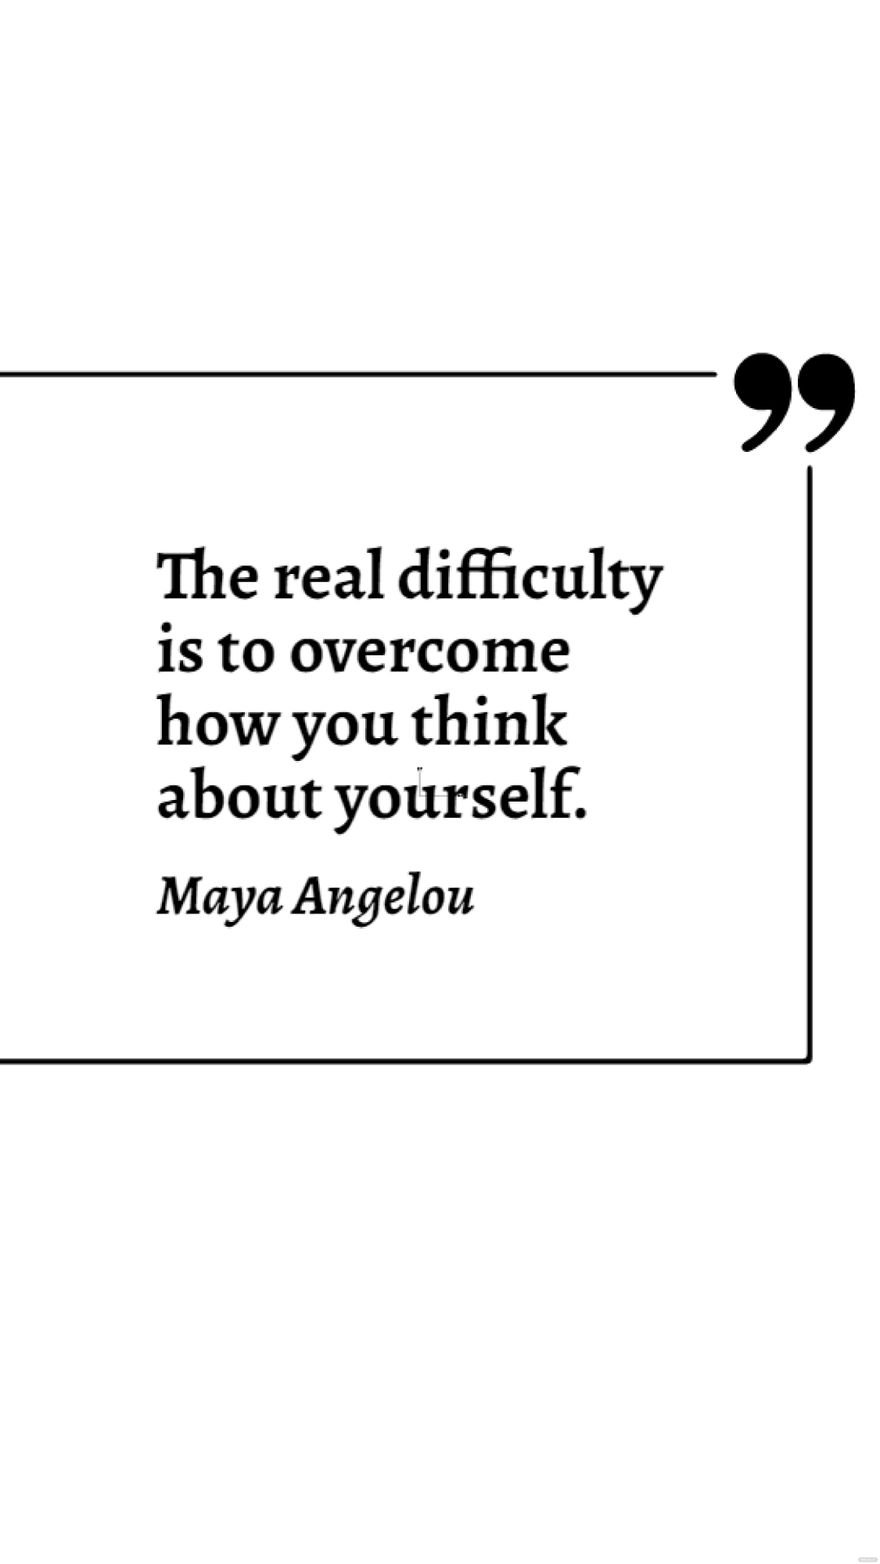 Free Maya Angelou - The real difficulty is to overcome how you think about yourself. in JPG